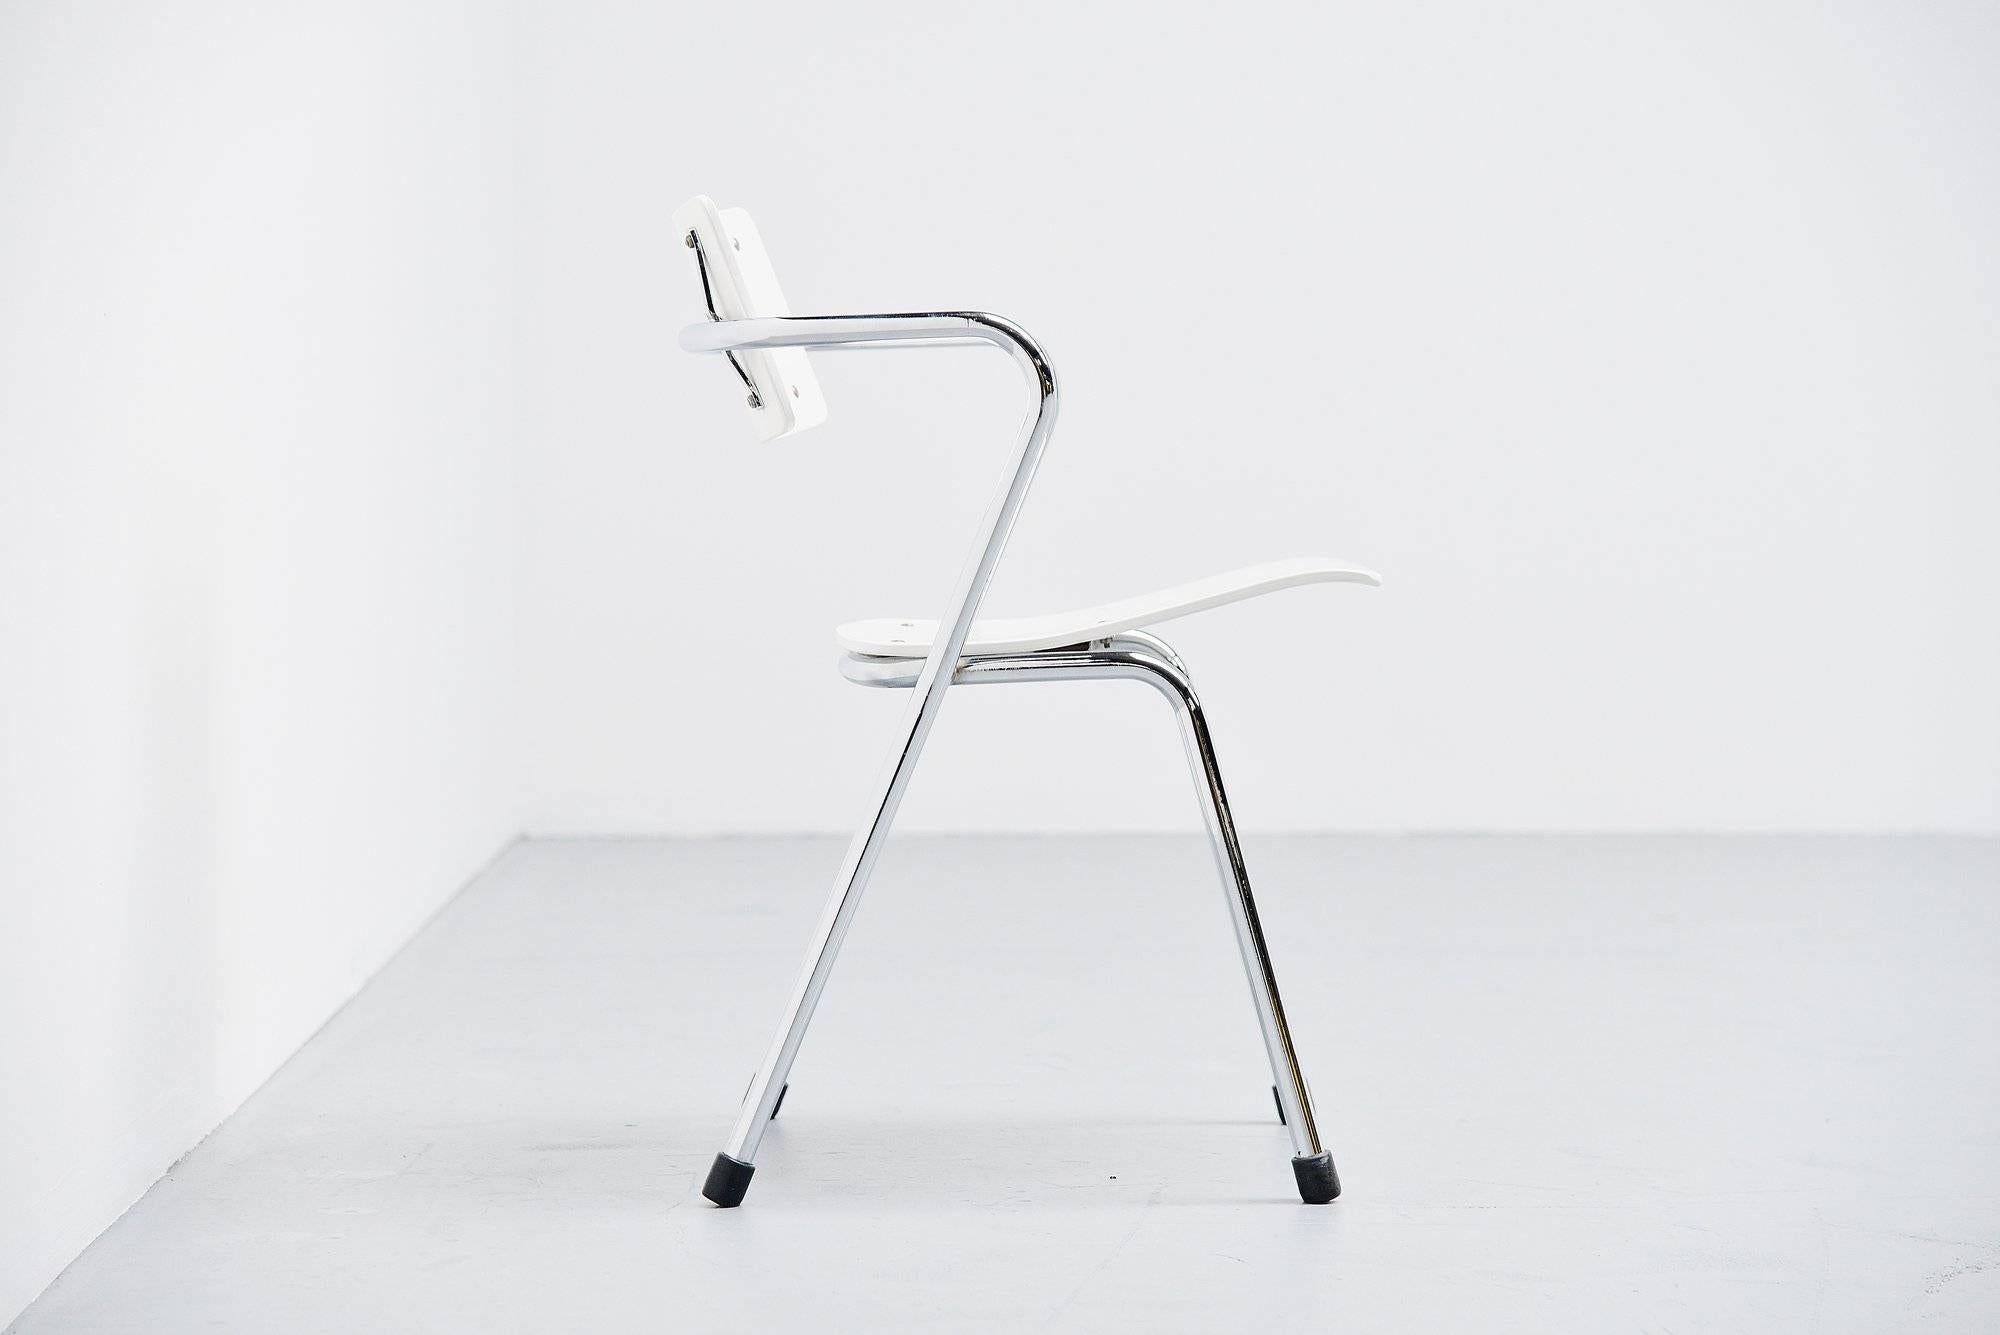 Very important industrial stacking chair model 9507/1, designed by Friso Kramer for Ahrend de Cirkel in 1953. This chair has a chrome-plated tubular metal frame and a white lacquered seat and back. This chair was also available in upholstered